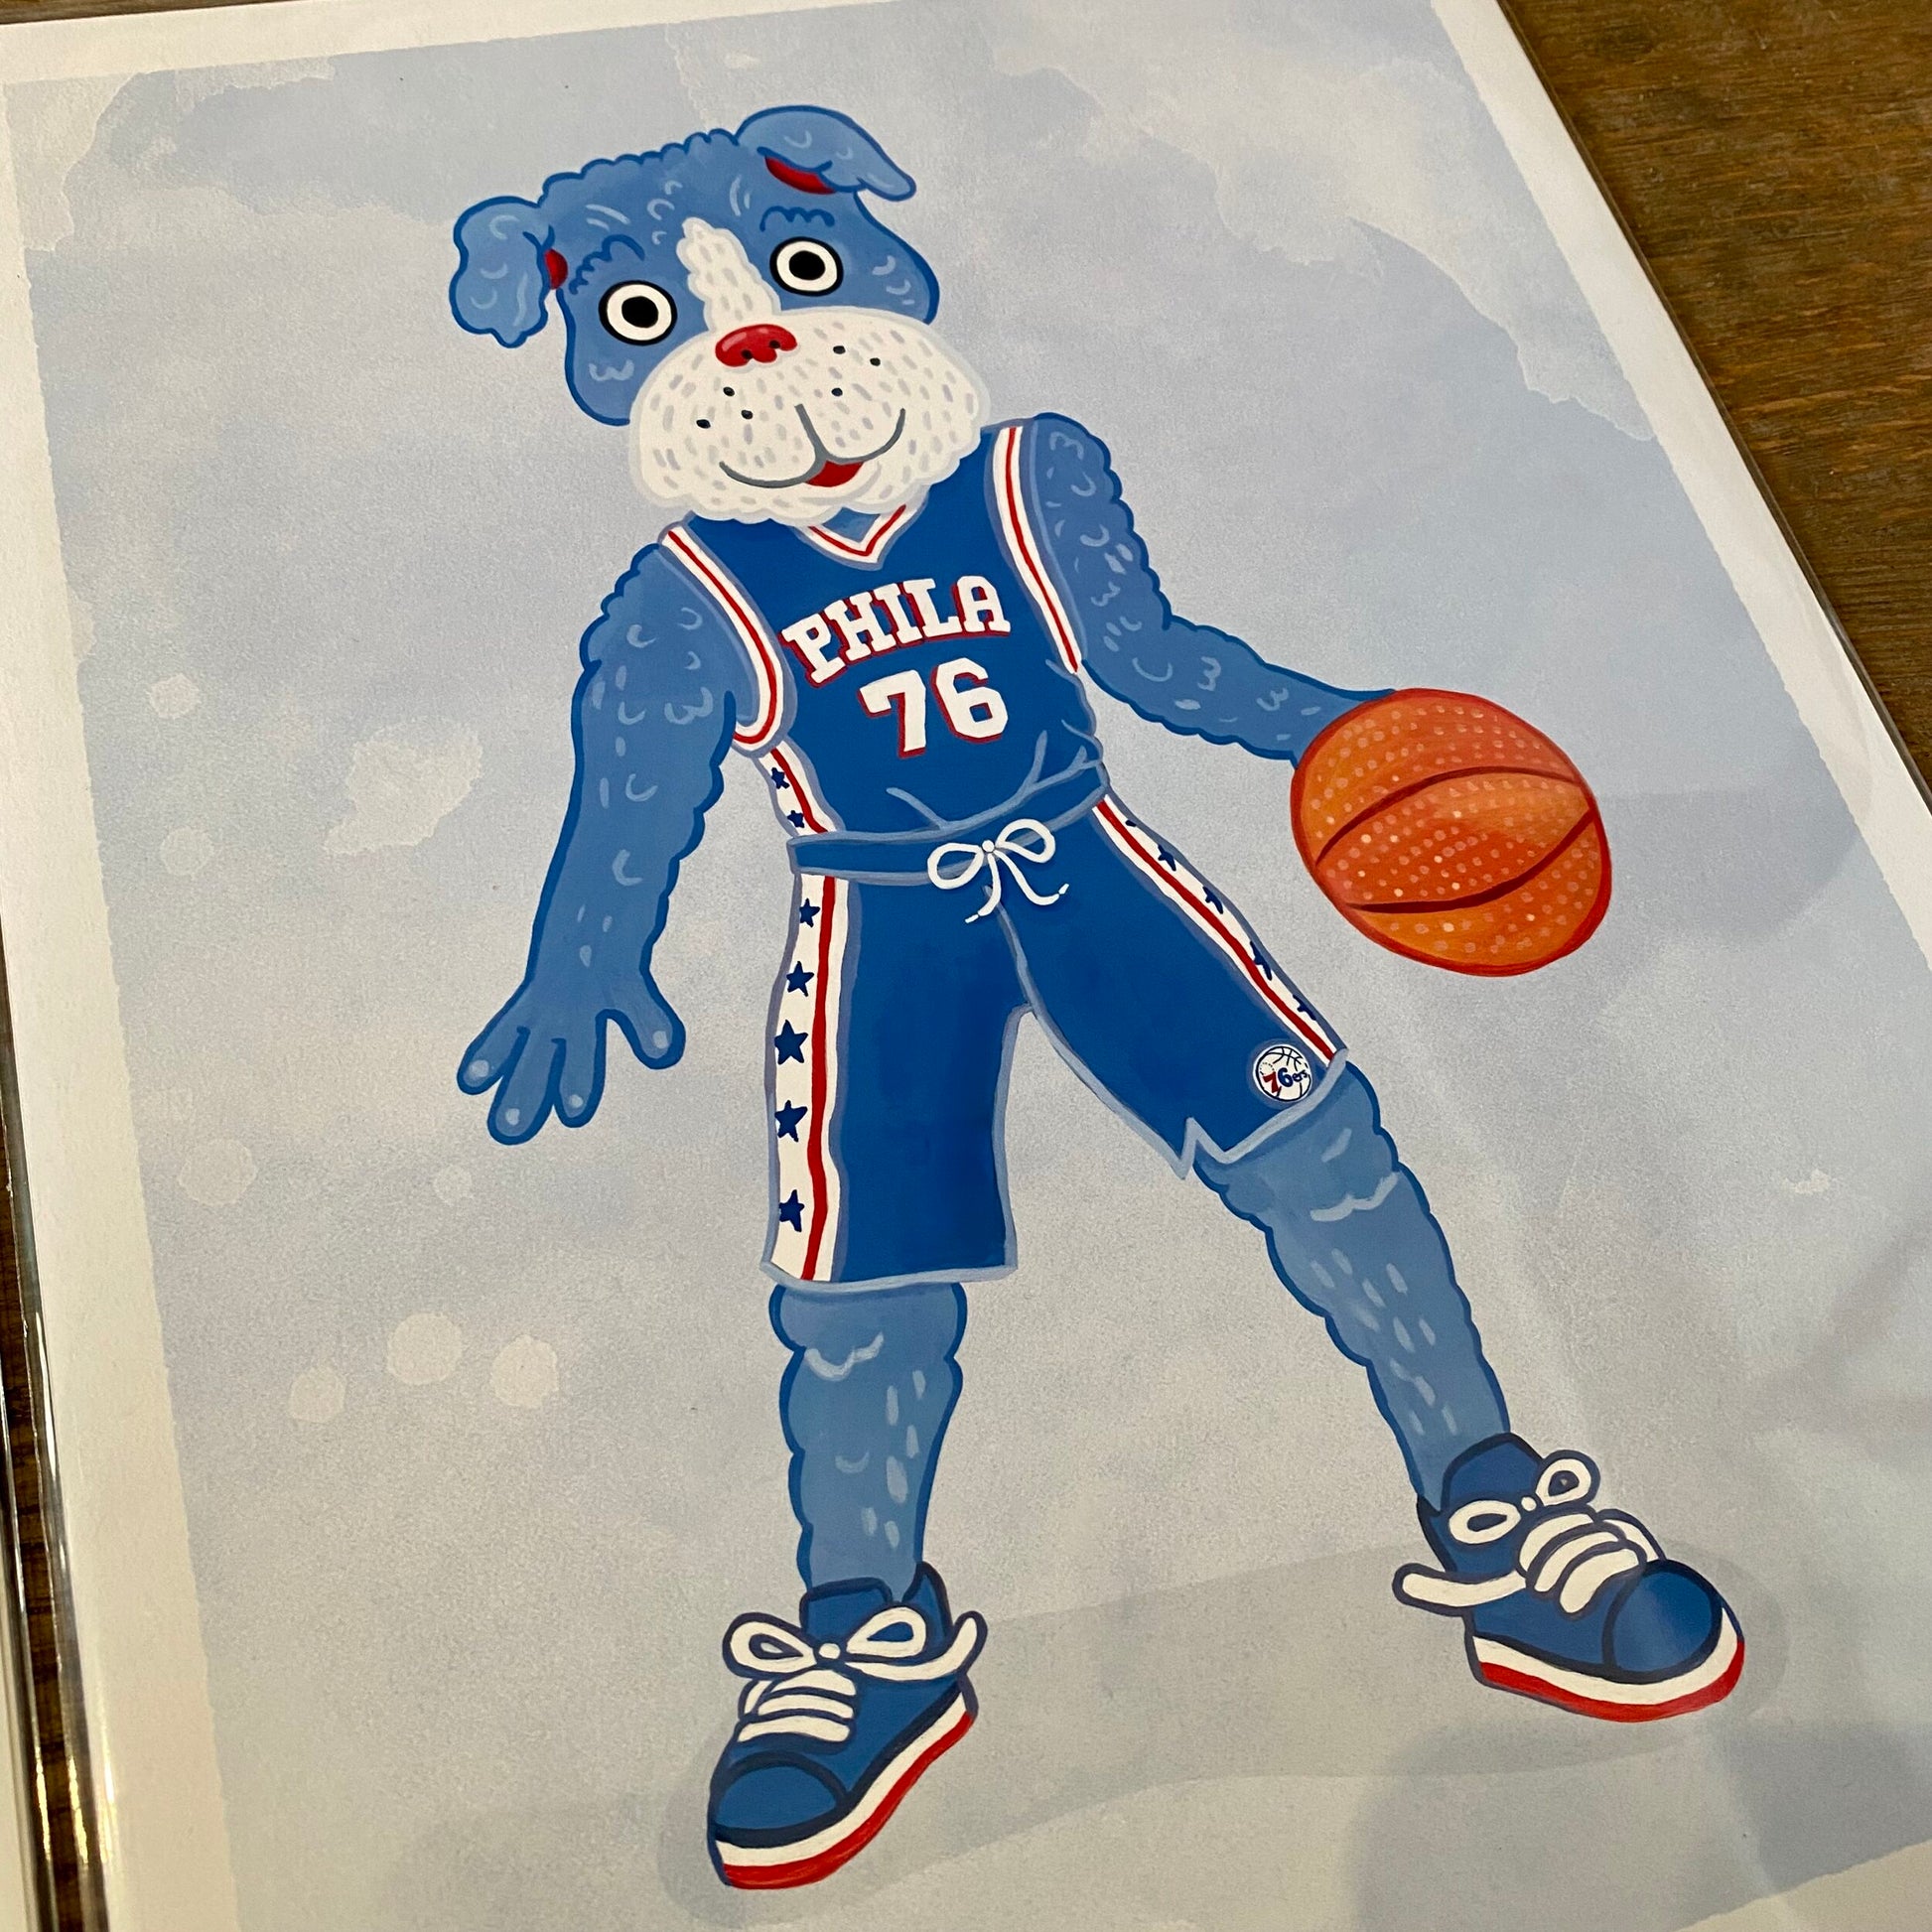 Illustration of a canine character dressed in a Philadelphia 76ers basketball uniform, dribbling a basketball by Jamie Bendas as part of the Philly Mascot Prints collection.